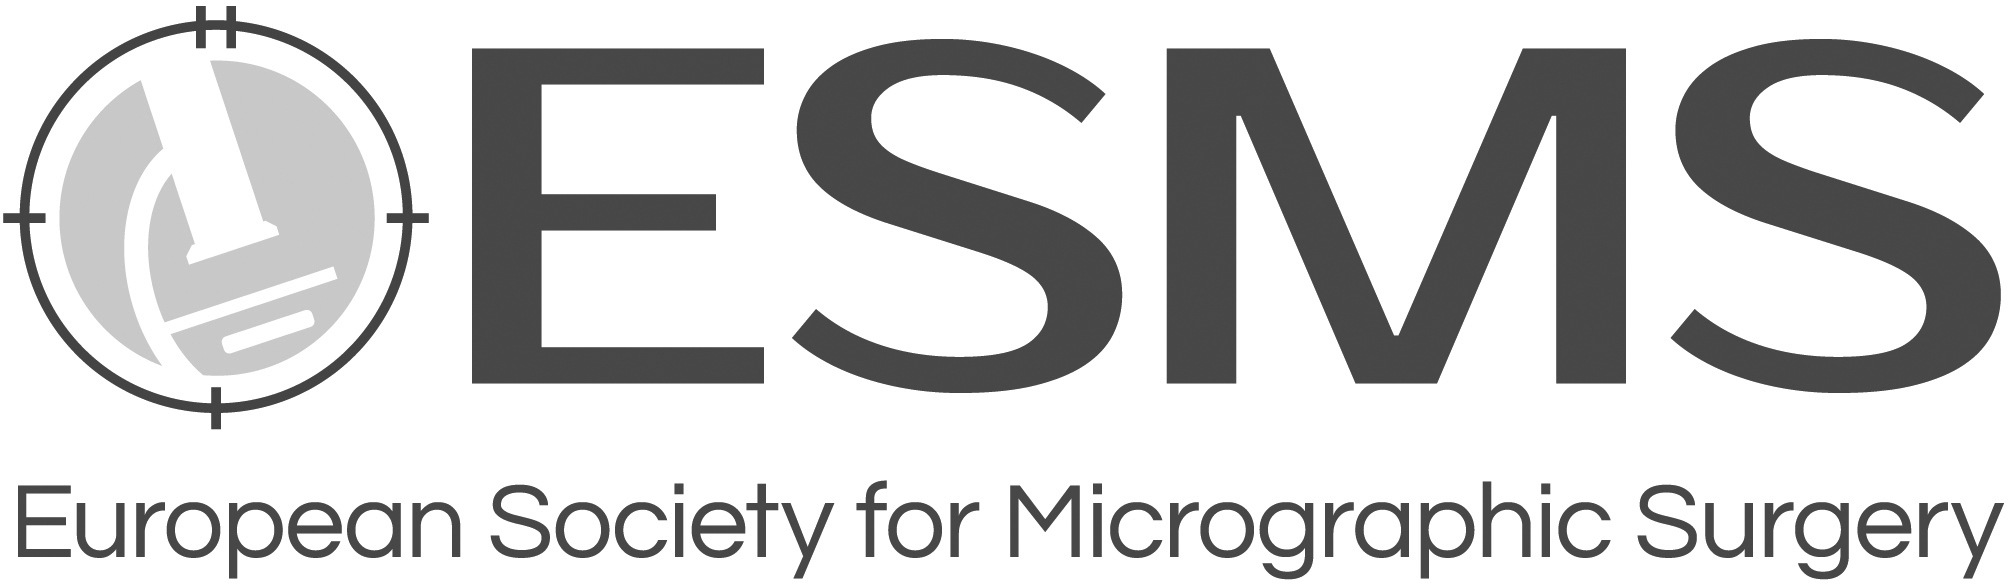 European Society for Micrographic Surgery